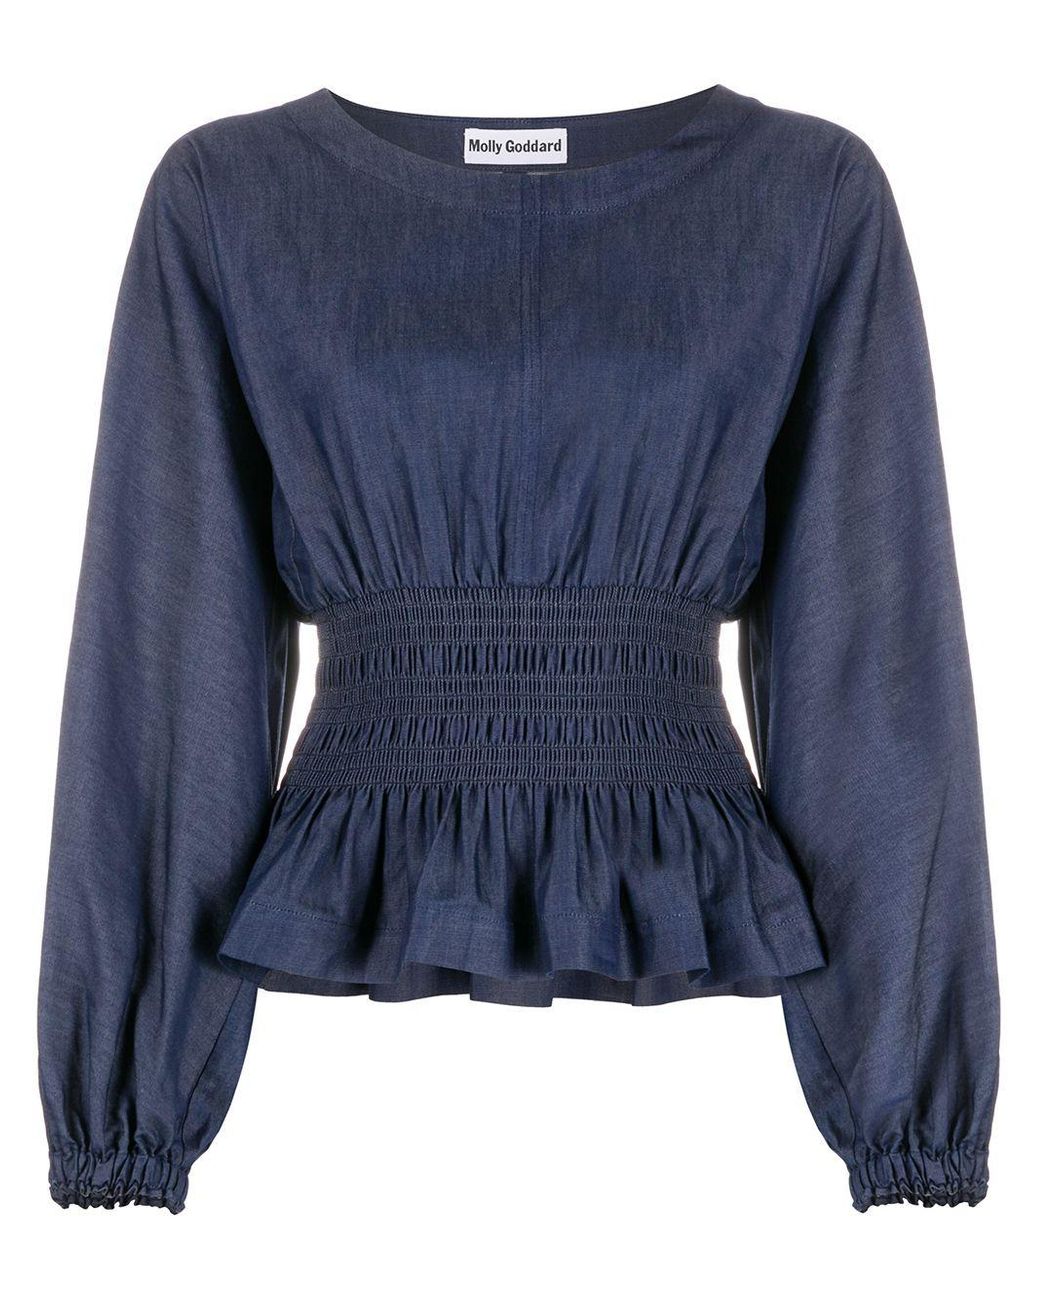 Molly Goddard Cotton Cinched-waist Peplum Blouse in Blue - Lyst